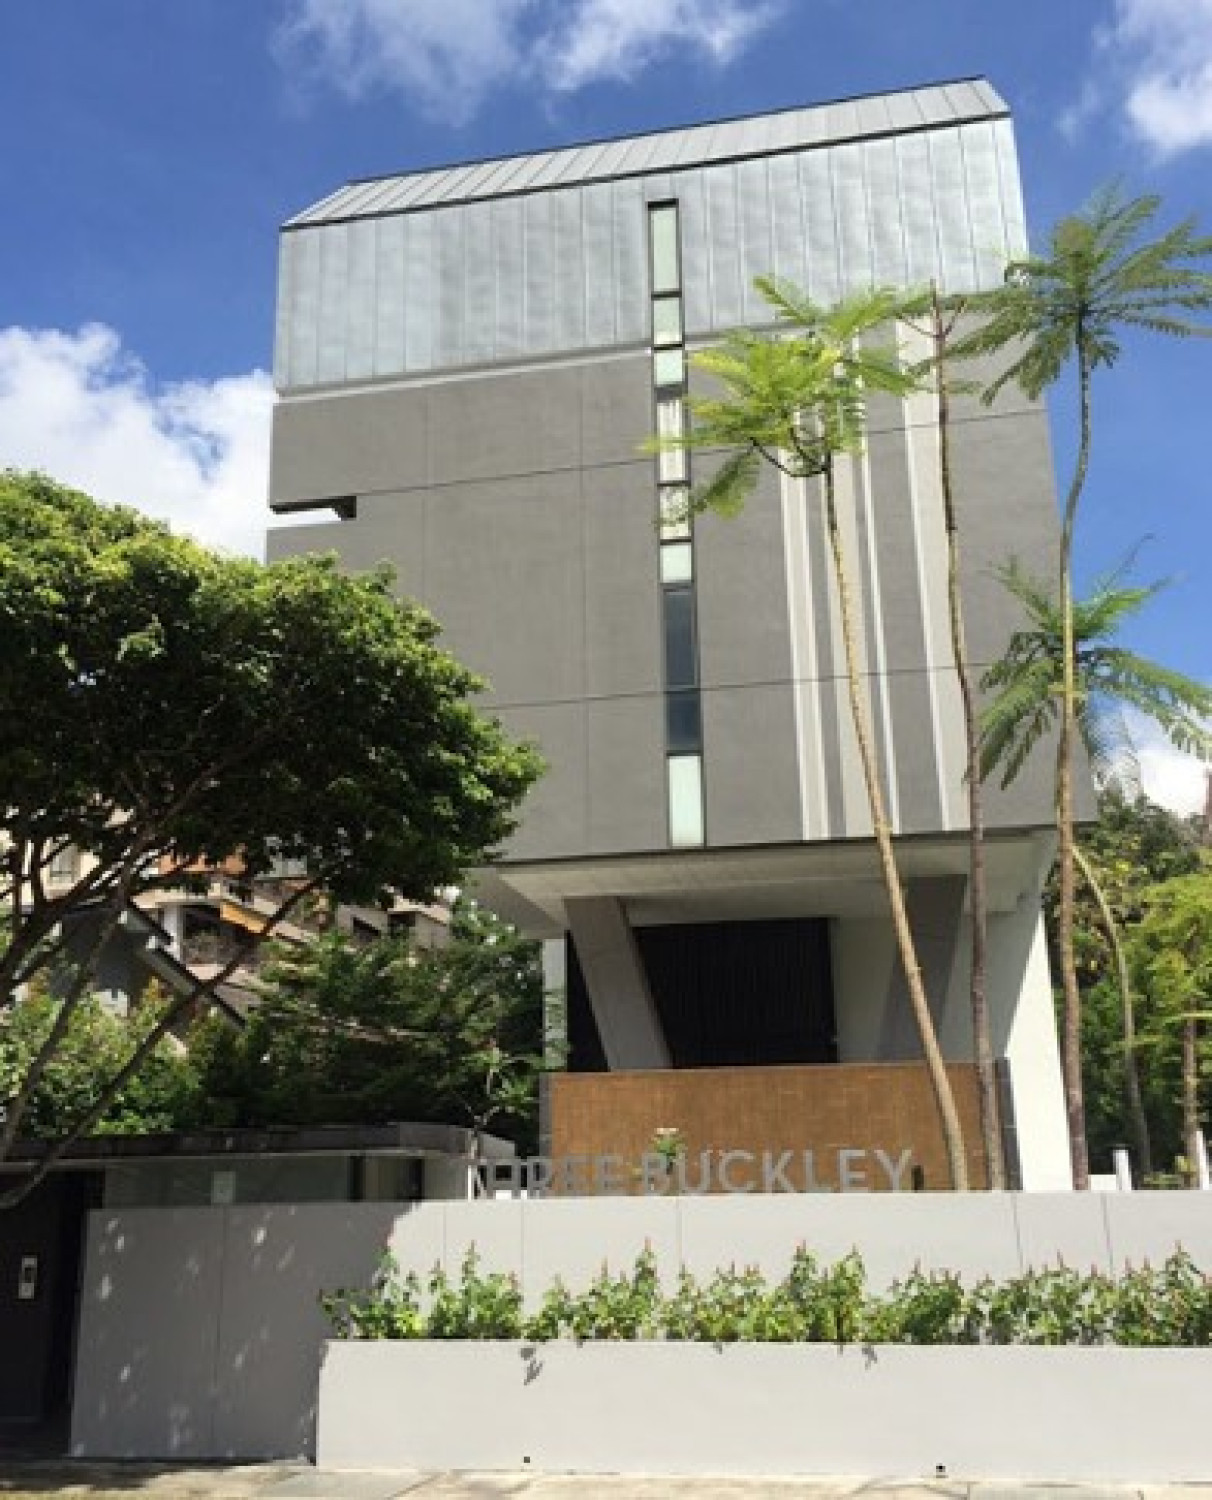 Corporate owner of Three Buckley offers development for $41 mil - Property News